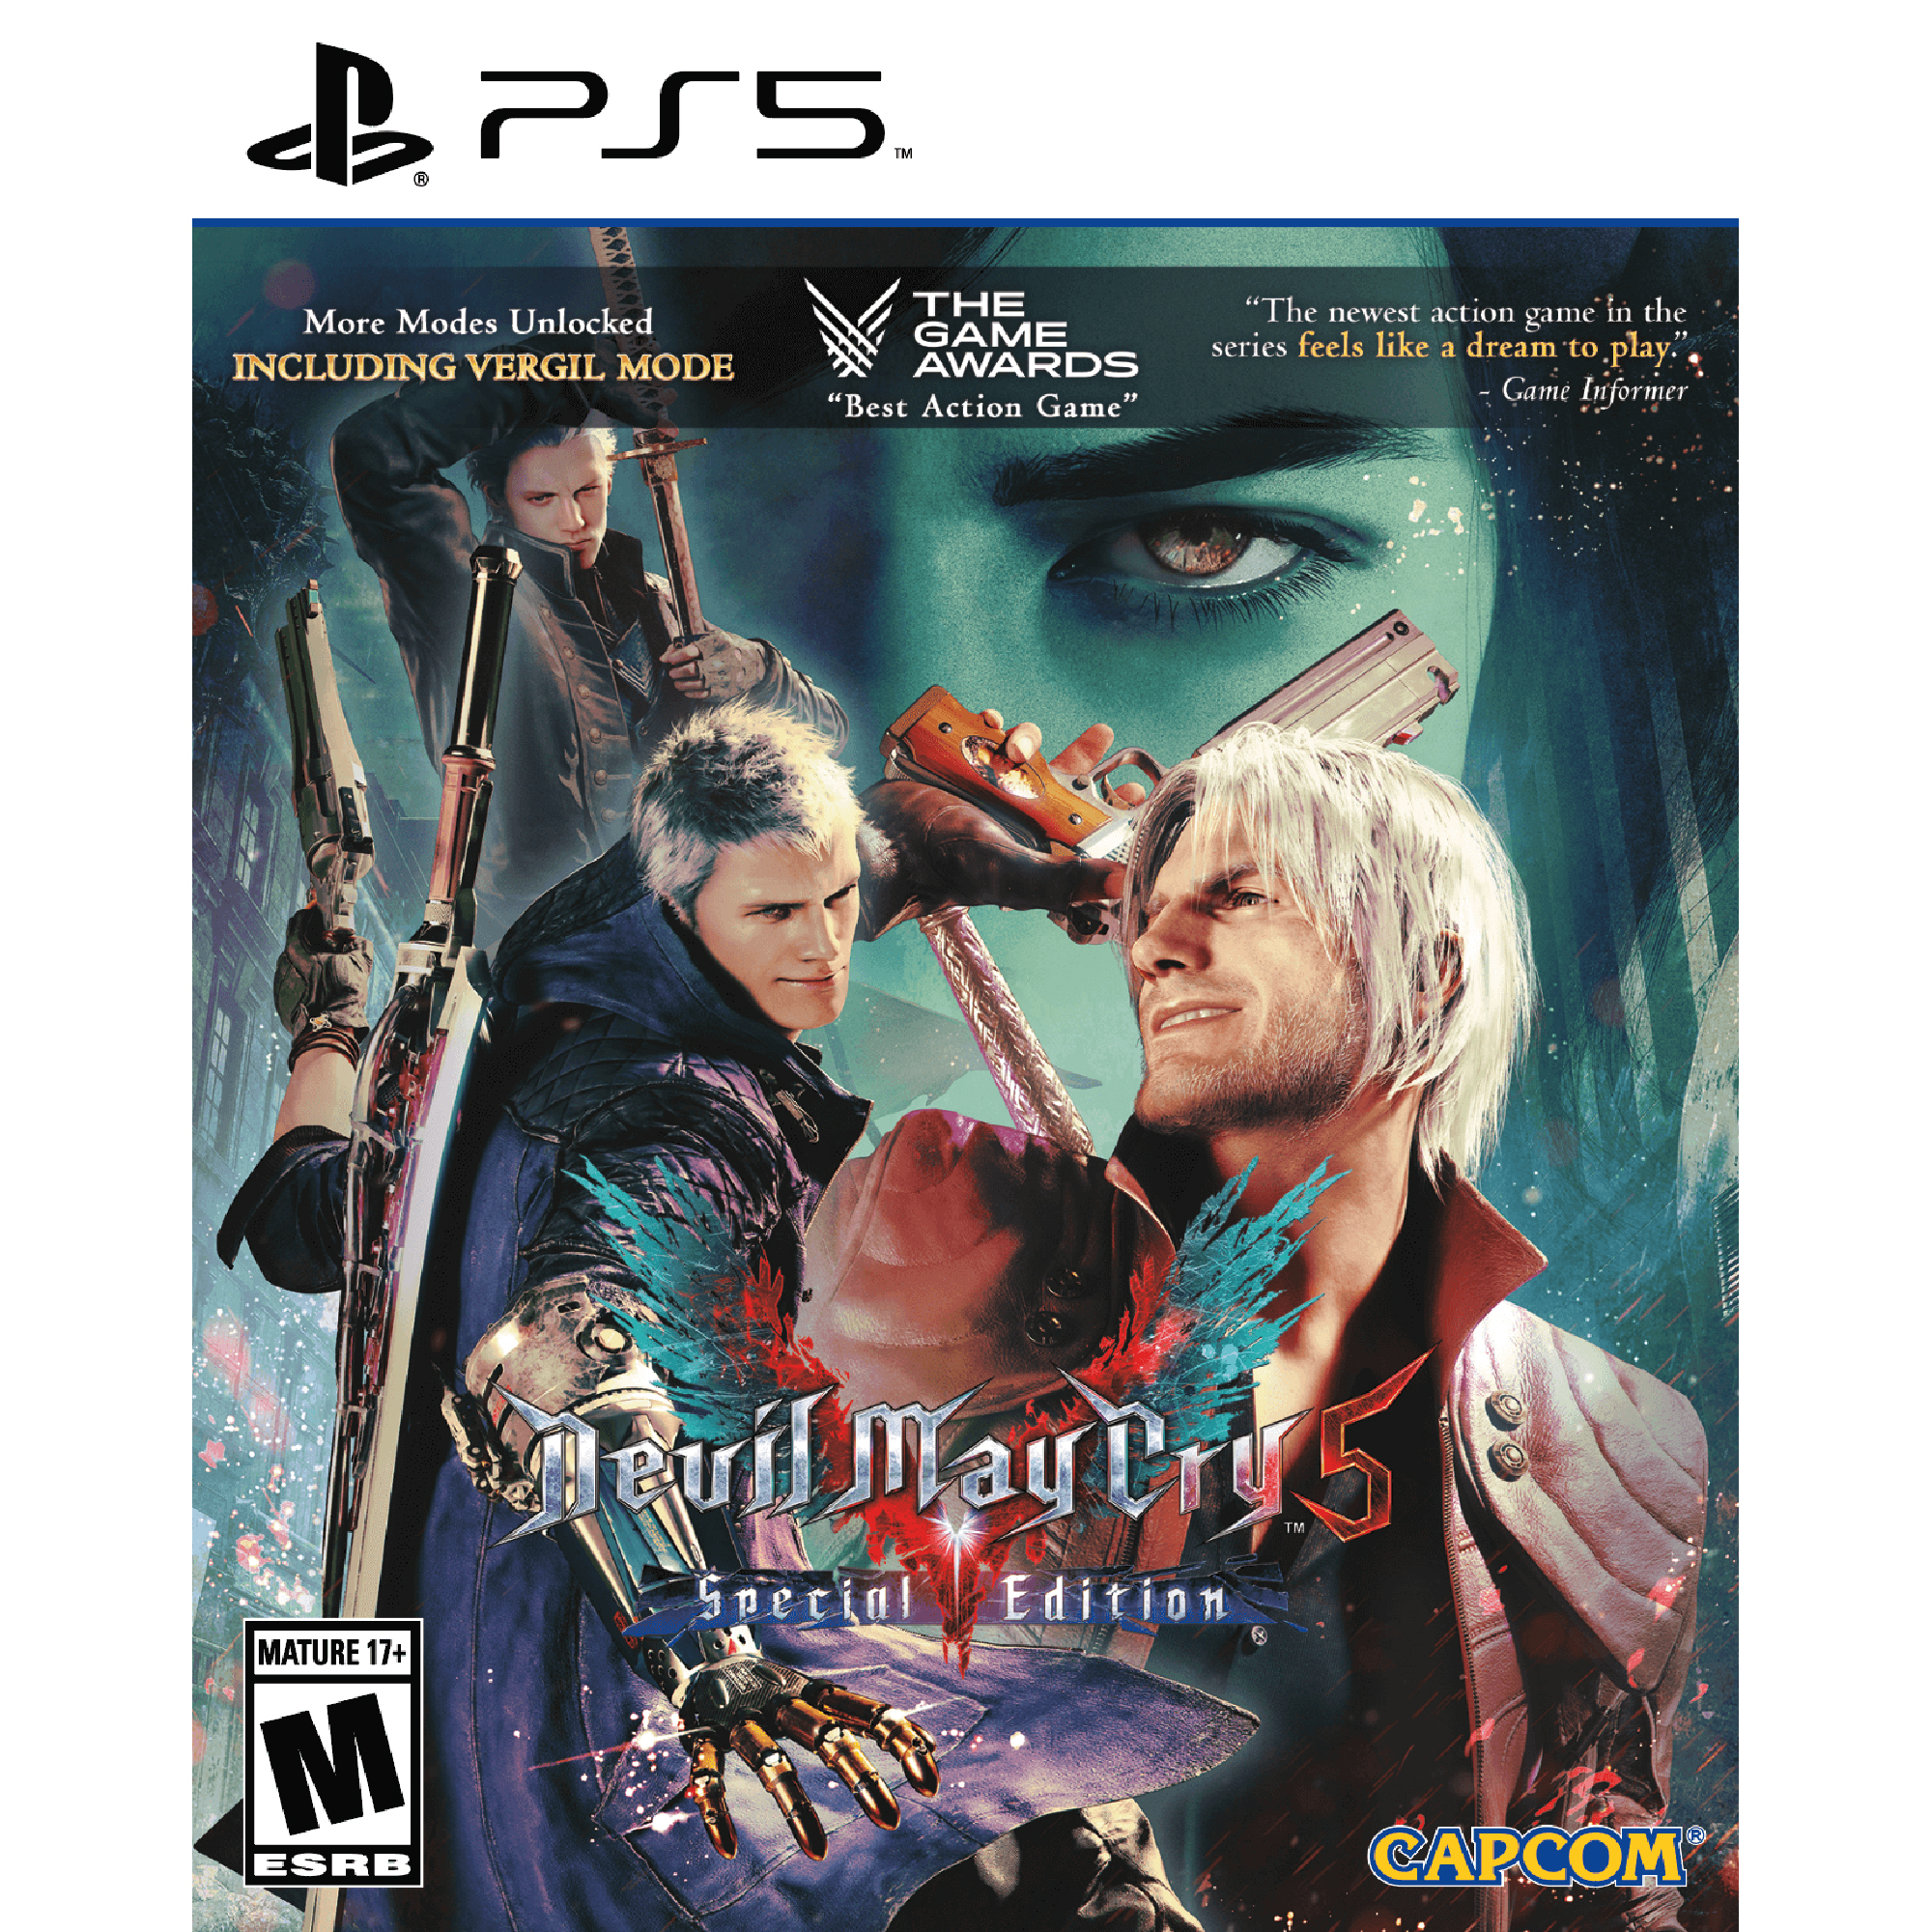 Devil May Cry 5 Special Edition, Capcom, PlayStation 5 - image 1 of 3